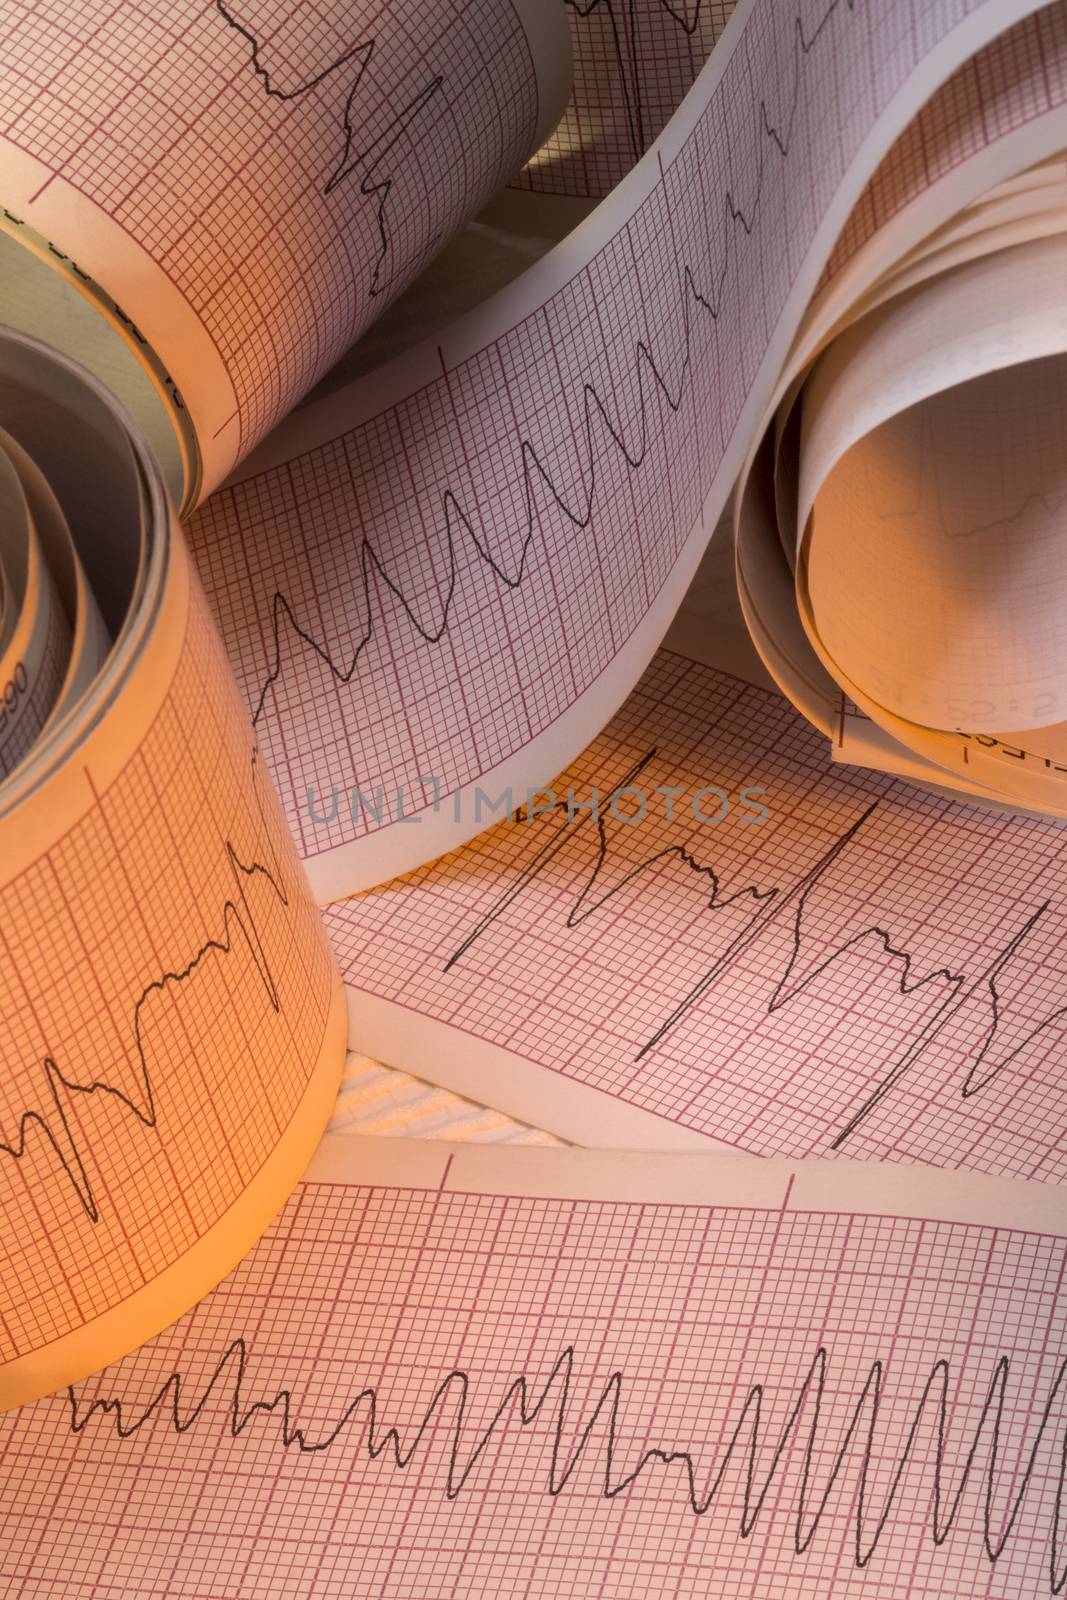 Electrocardiograph traces of Cardiac Arrhythmia including Ventricular Fibrallation (VF) and Ventricular Tachycardia (VT). Also known as cardiac dysrhythmia, this a group of conditions in which the heartbeat is irregular, too fast, or too slow. VT and VF can lead to cardiac arrest and death.